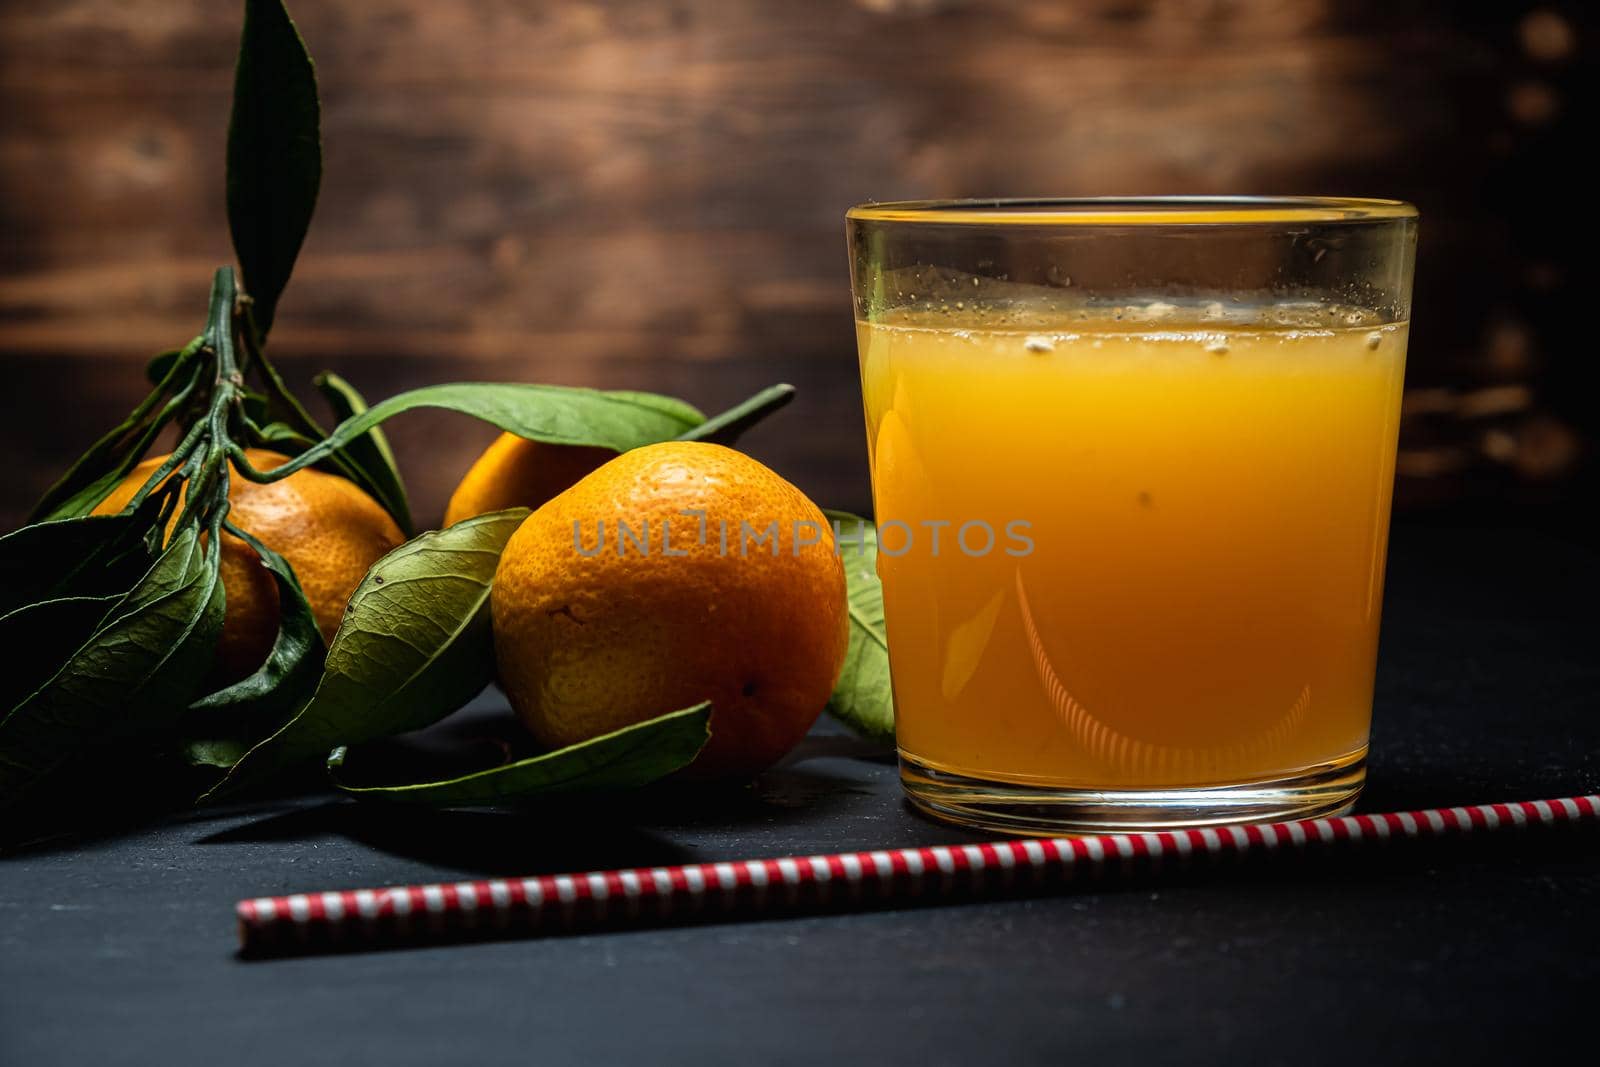 on a dark surface are three tangerines with leaves next to a glass of juice. Nearby lies a red and white striped straw. Horizontal orientation.